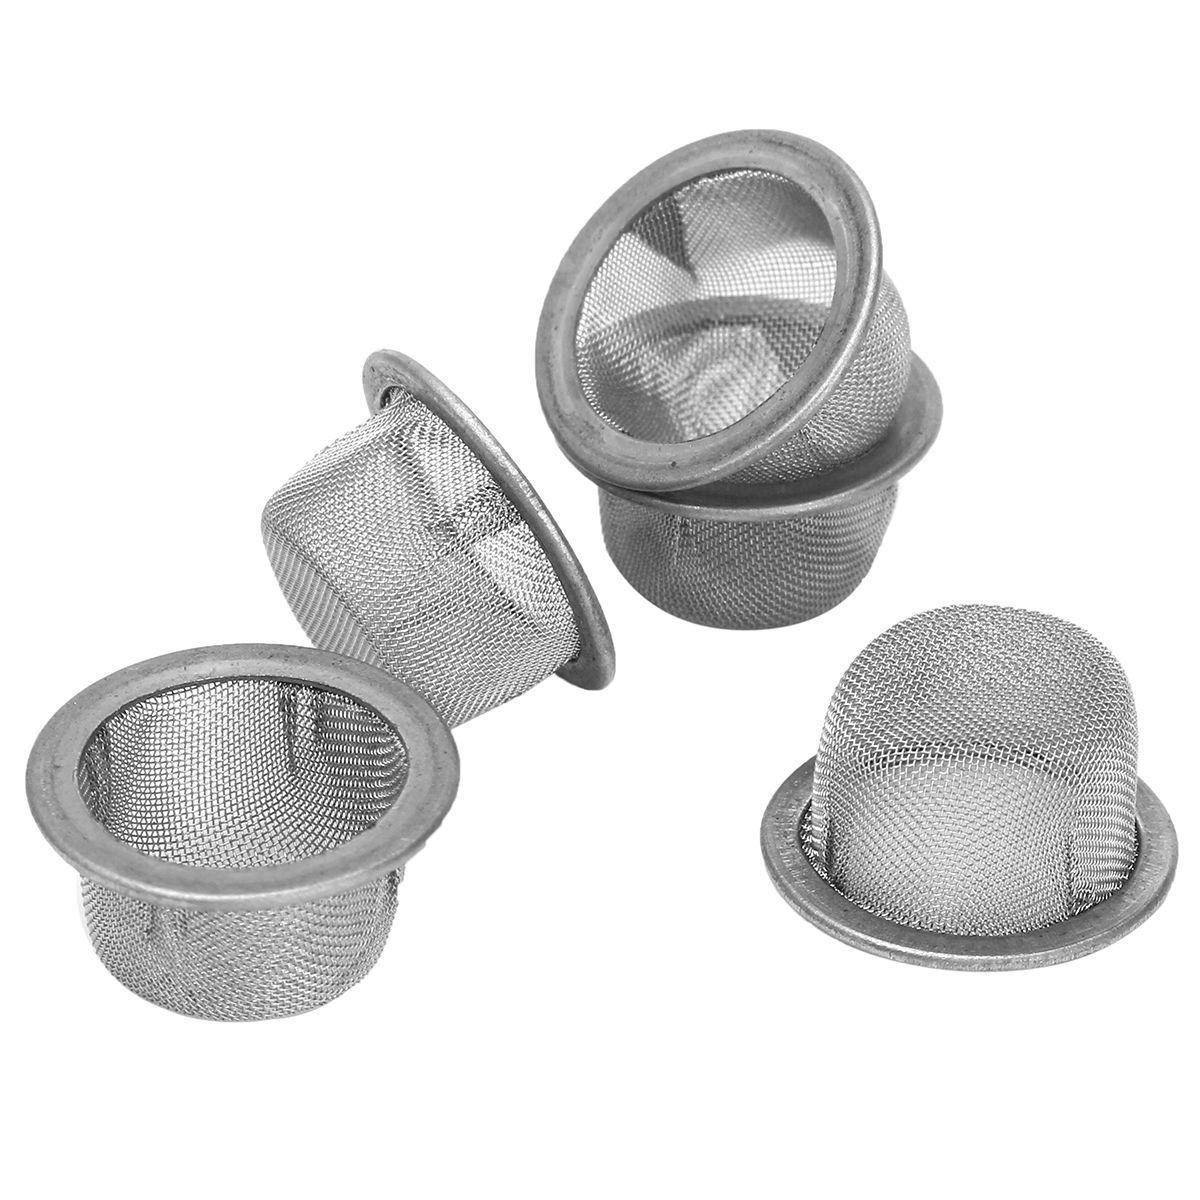 5Pcs-12mm-Dome-Slide-Screen-Meshes-Stainless-Steel-Cup-Filter-Replacement-1141079